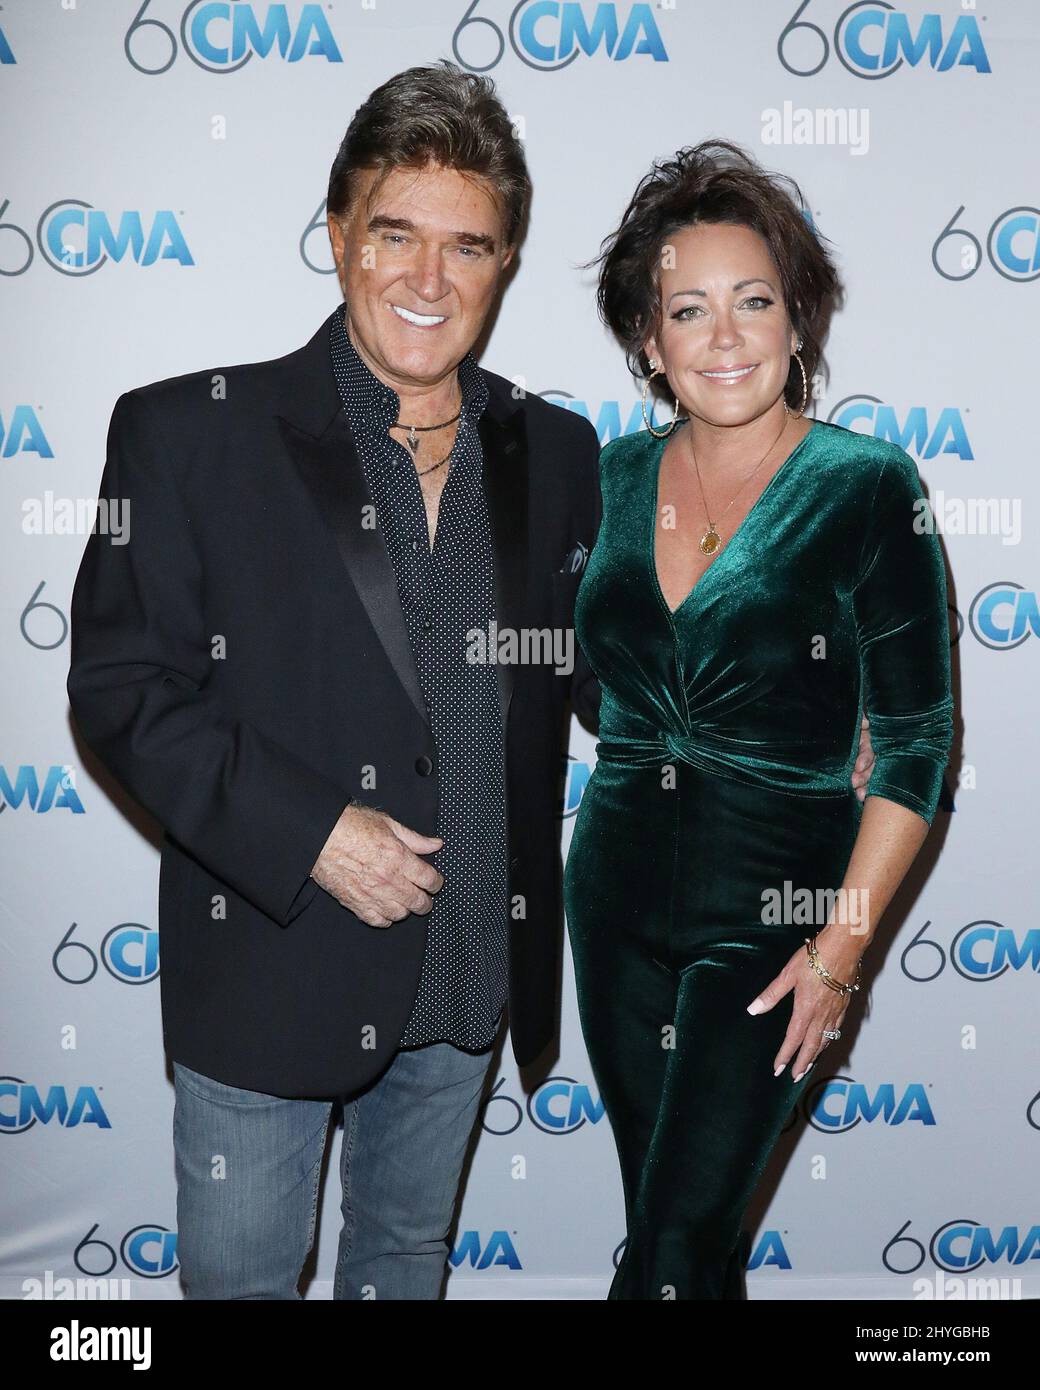 T.G. Sheppard and Kelly Lang attending the Country Music Association's 60th Birthday Party held on September 26, 2018, at the Wildhorse Saloon in Nashville, Tennessee Stock Photo